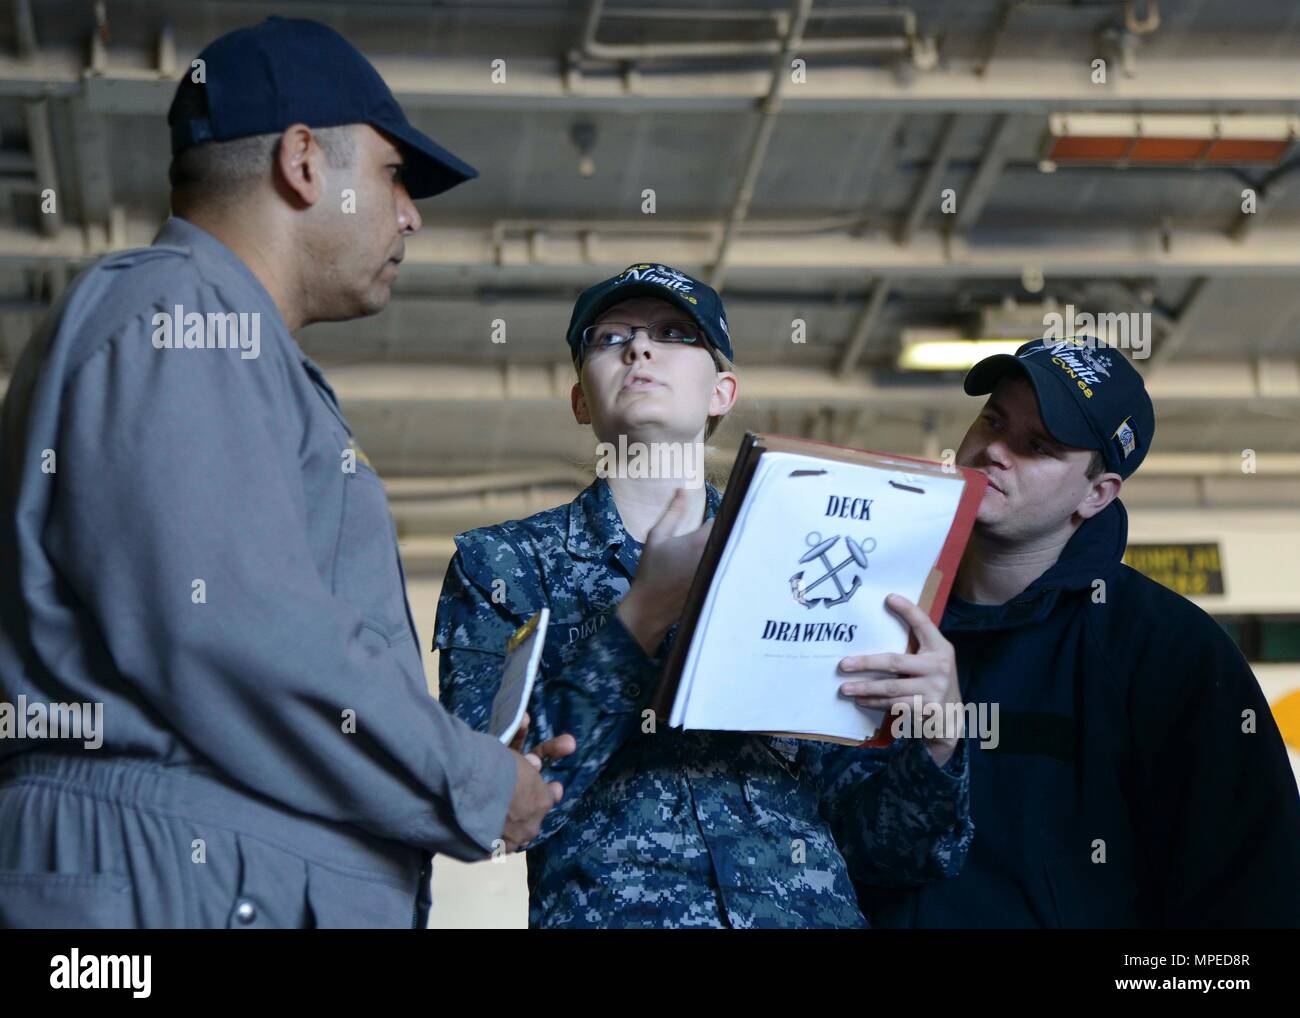 SAN DIEGO (Feb. 13, 2017) - Lt. Richard Barr, a member of the Board of Inspection and Survey (INSURV) team, speaks with Sailors during a demonstration on board the aircraft carrier USS Nimitz (CVN 68). Nimitz is currently undergoing INSURV in preparation for an upcoming 2017 deployment. (U.S. Navy photo by Mass Communication Specialist 3rd Class Samuel Bacon/Released) Stock Photo